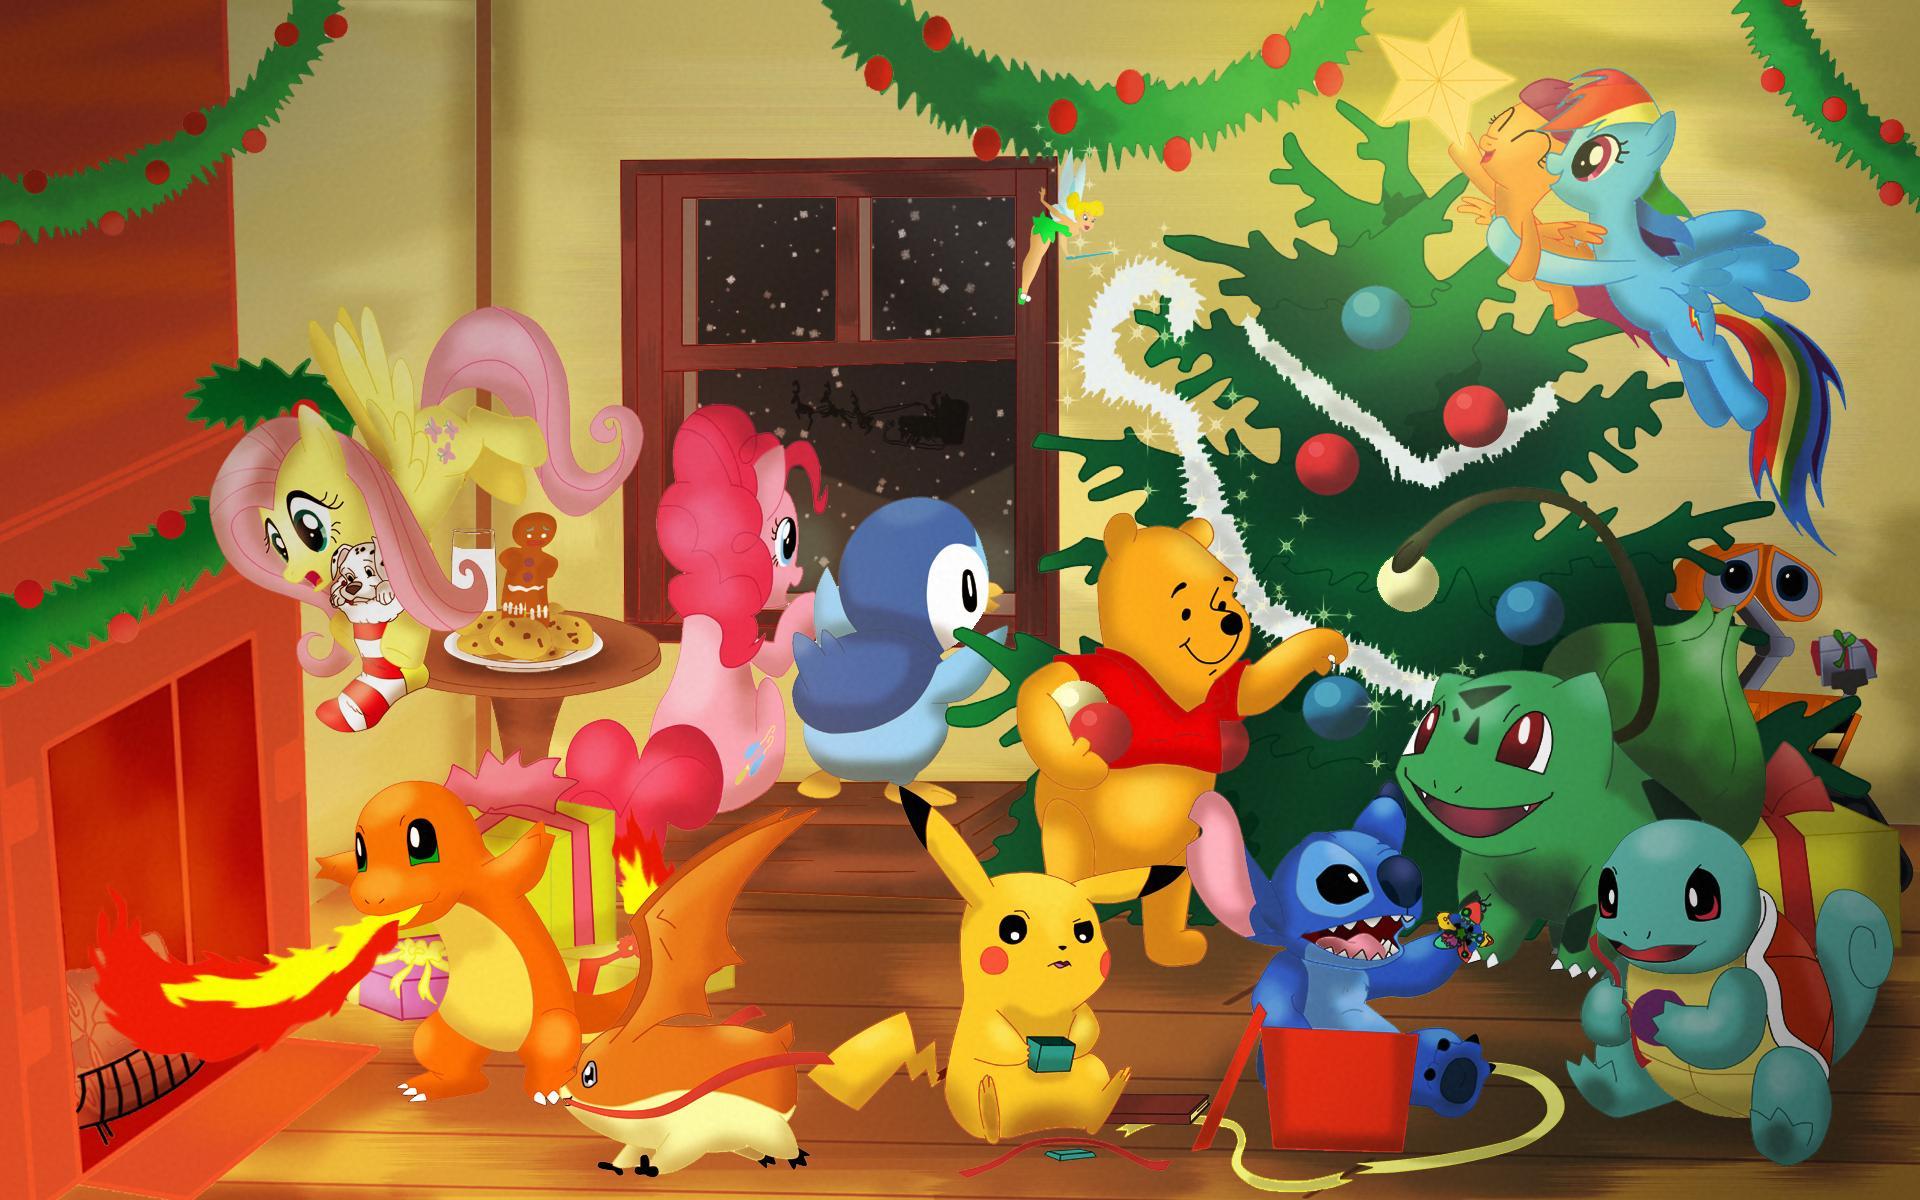 Christmas with Family wallpaper from Pokemonwallpapersorg Pokemon  Eeveelutions Christmas Wallpapers  Pokemon Christmas Cool pokemon